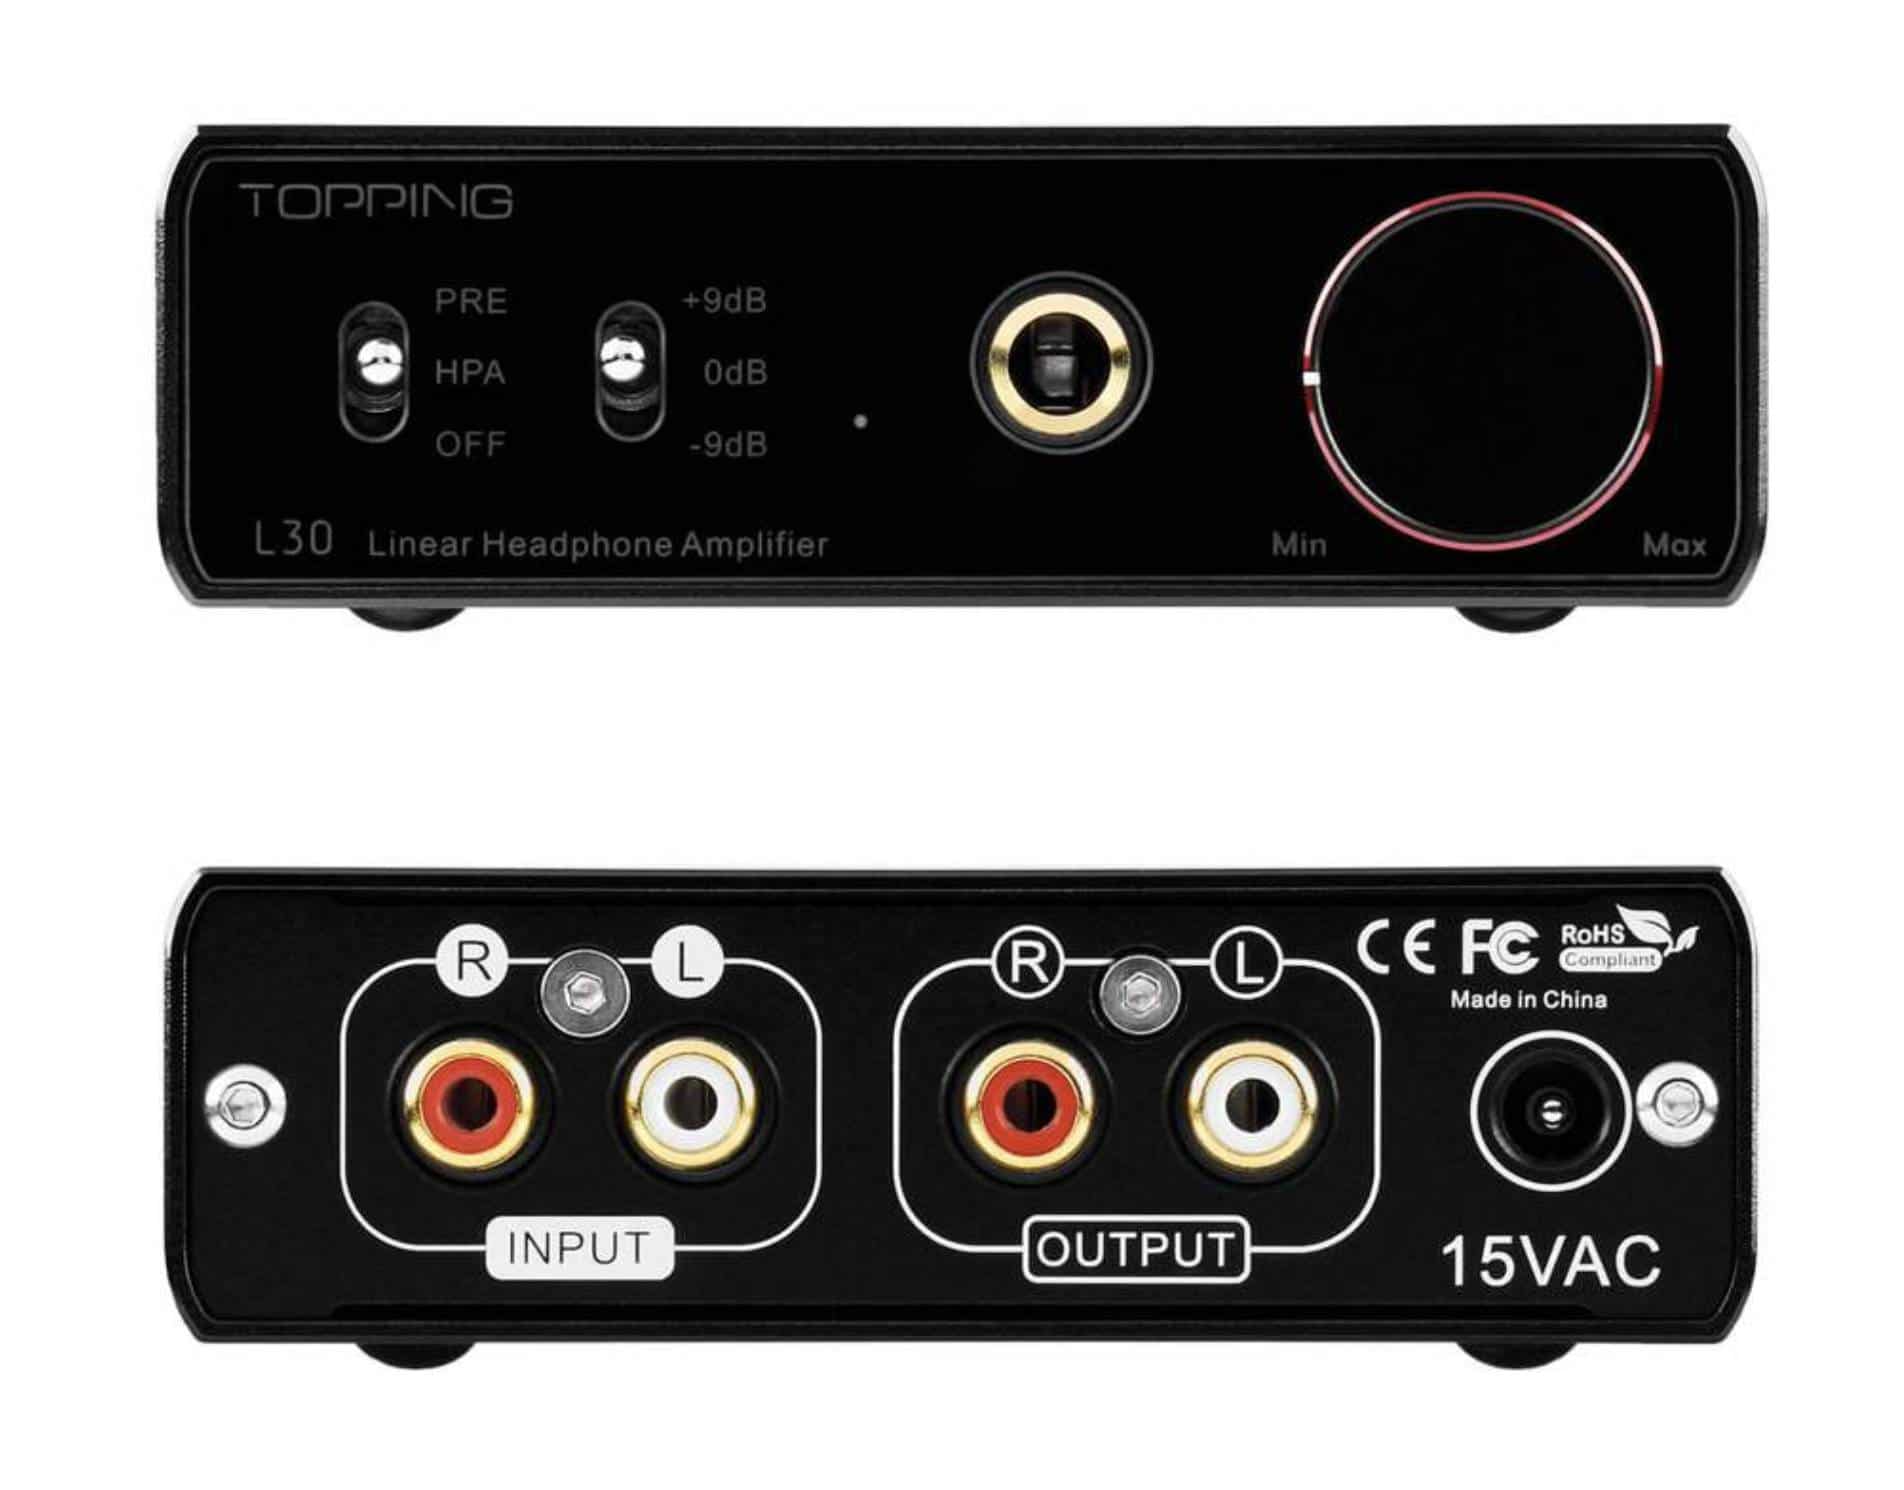 L30 Headphone Amp From Topping